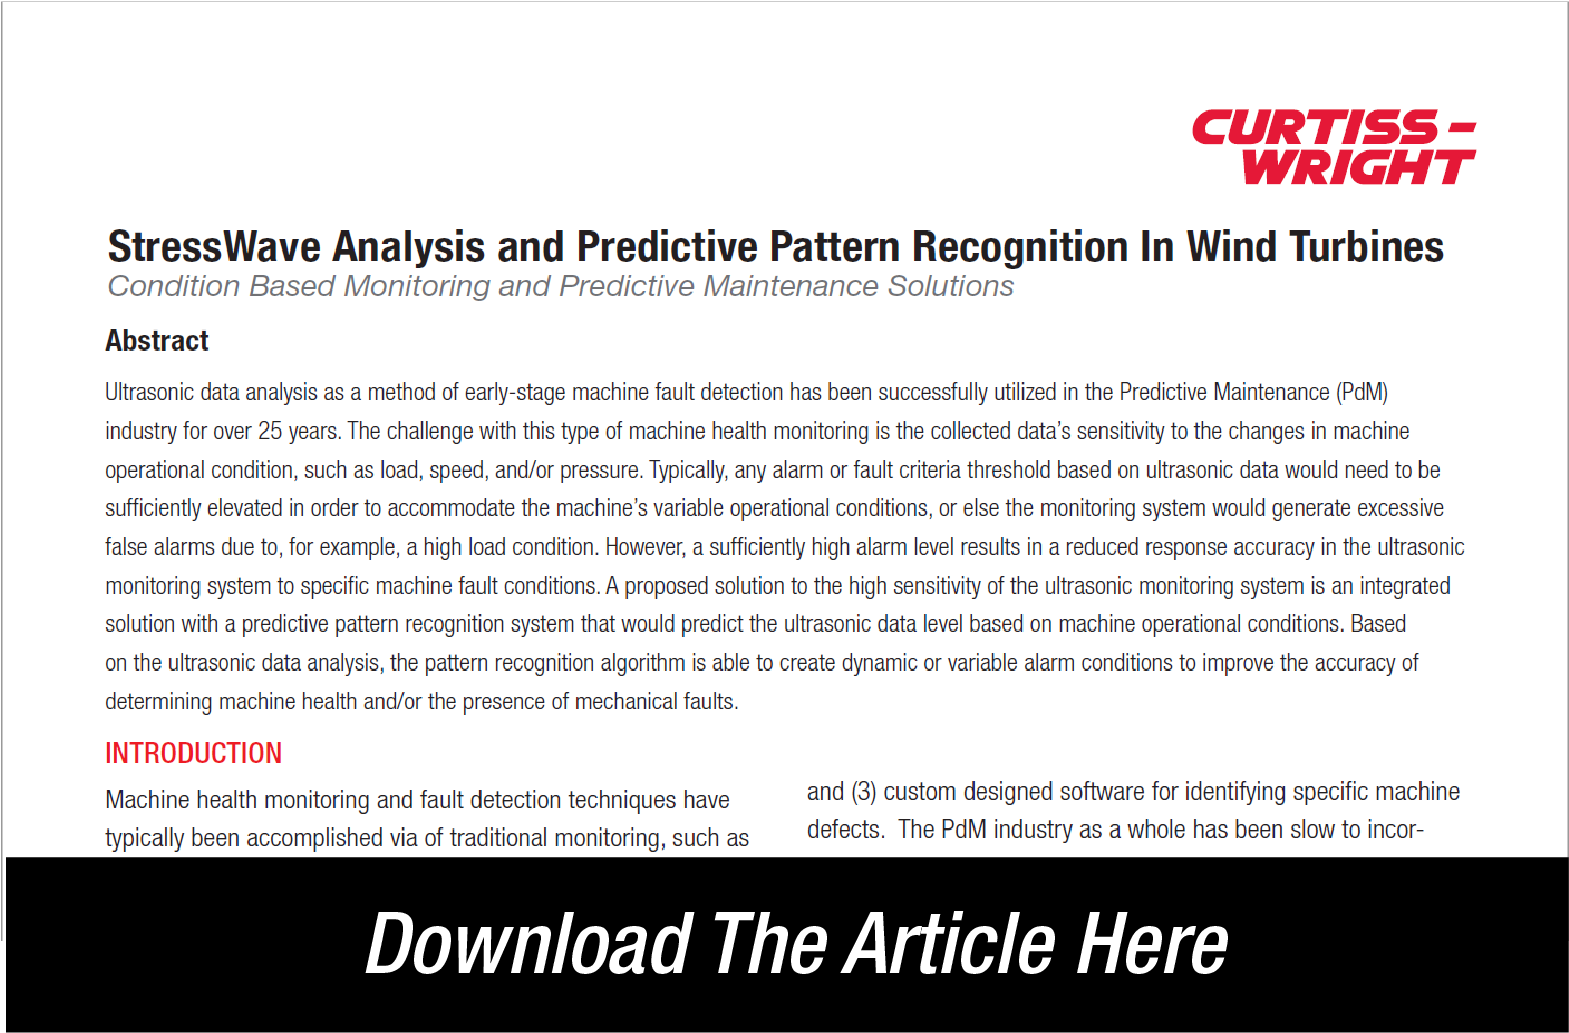 StressWave Analysis and Predictive Pattern Recognition In Wind Turbines